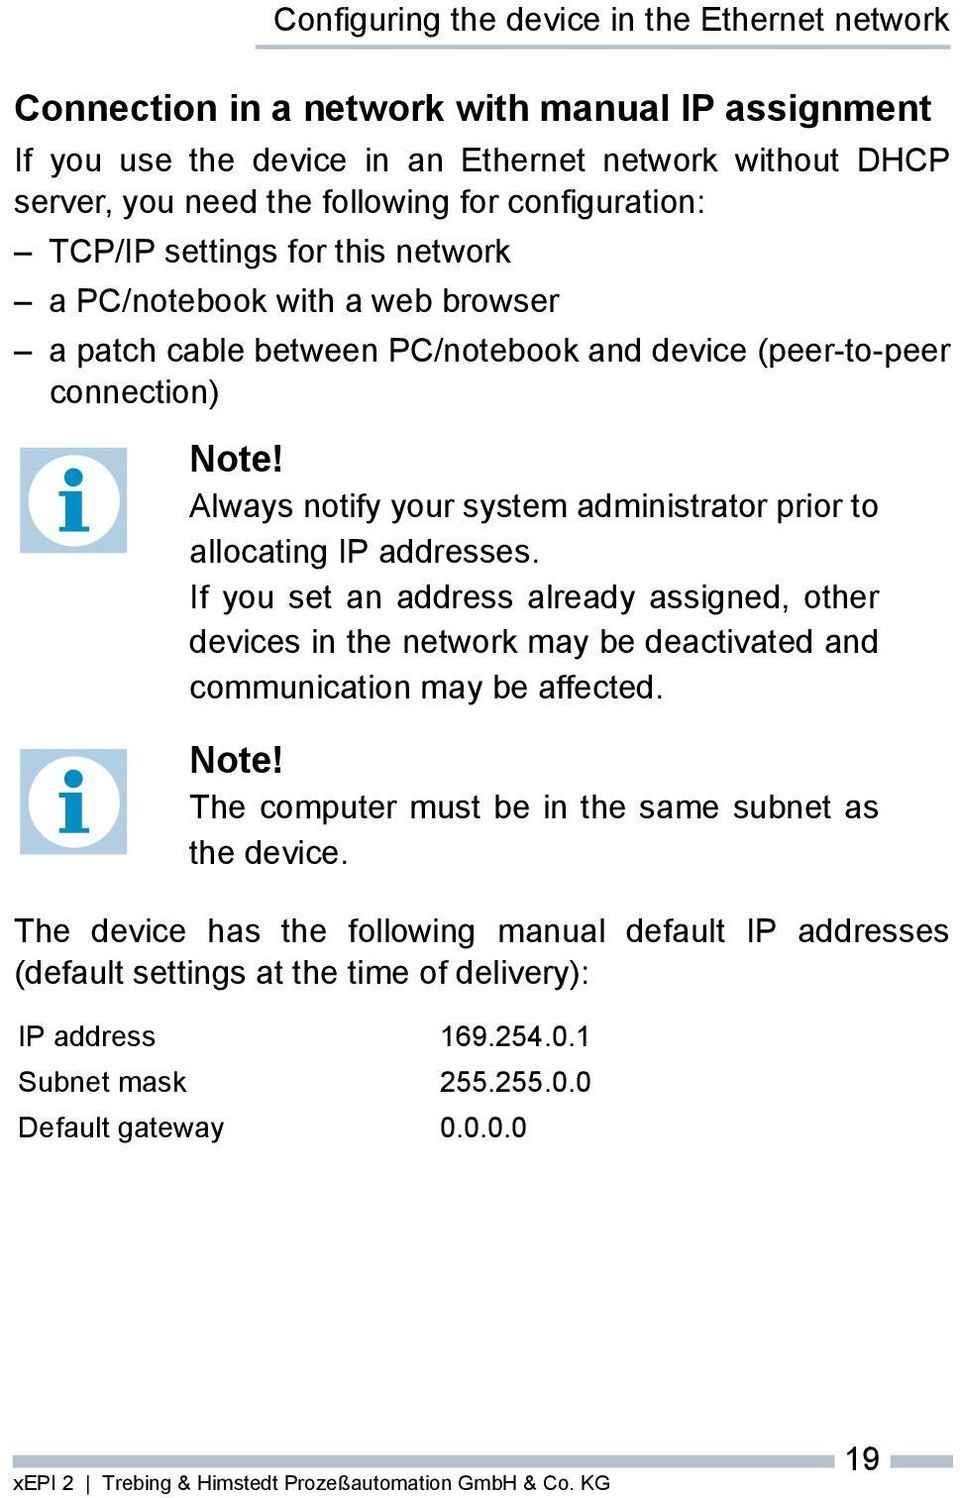 Always notify your system administrator prior to allocating IP addresses. If you set an address already assigned, other devices in the network may be deactivated and communication may be affected.